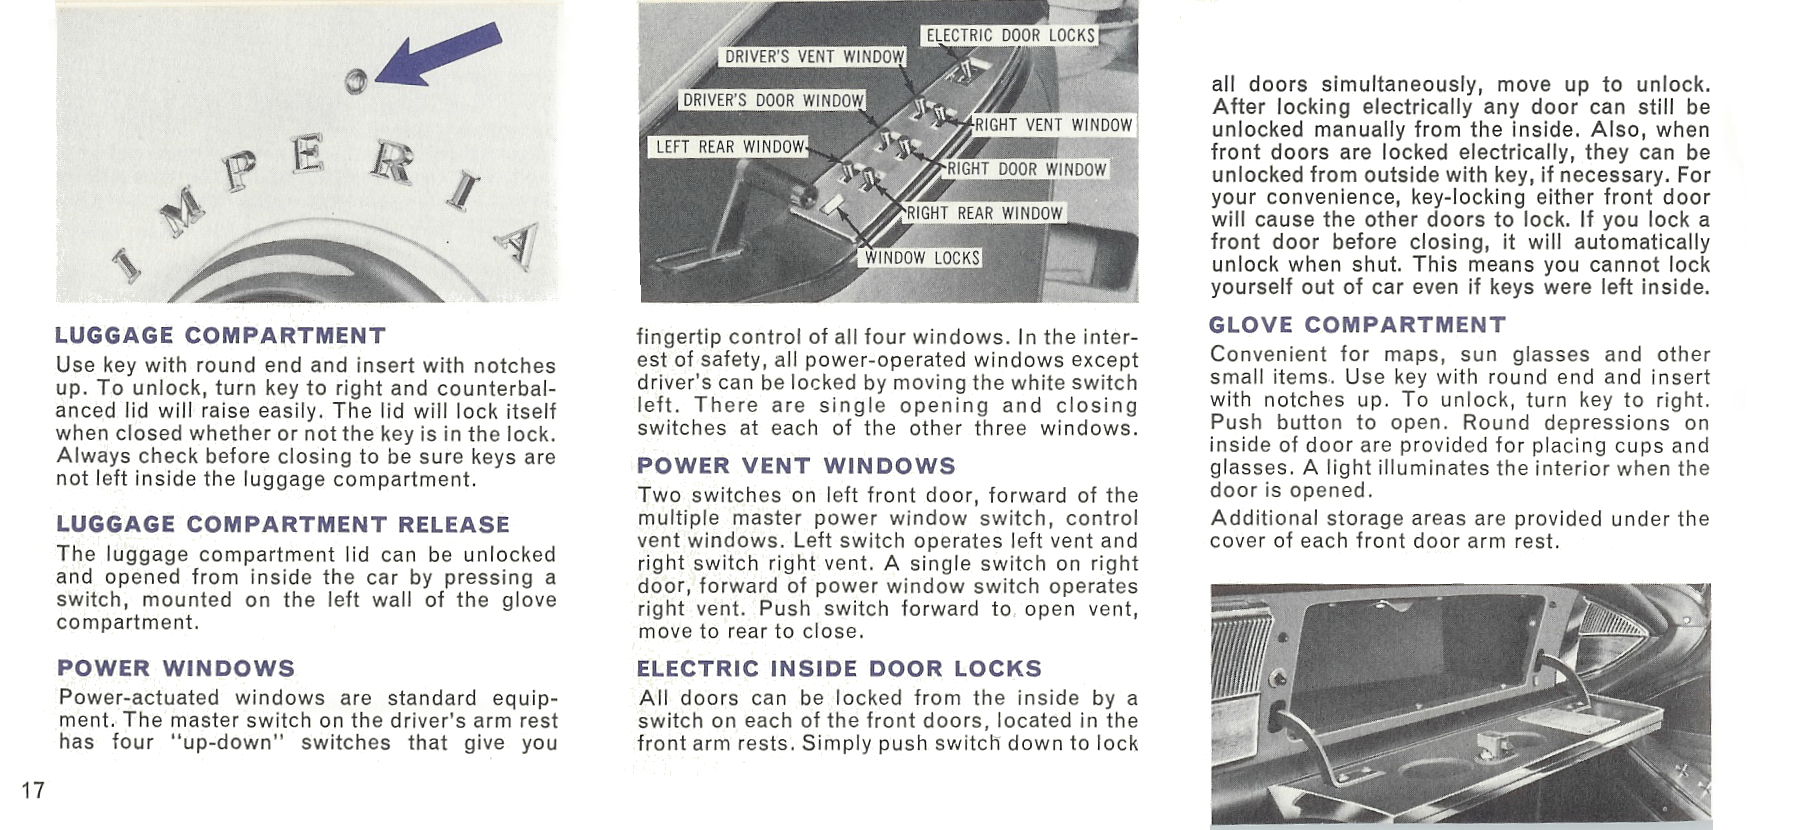 1965 Chrysler Imperial Owners Manual Page 21